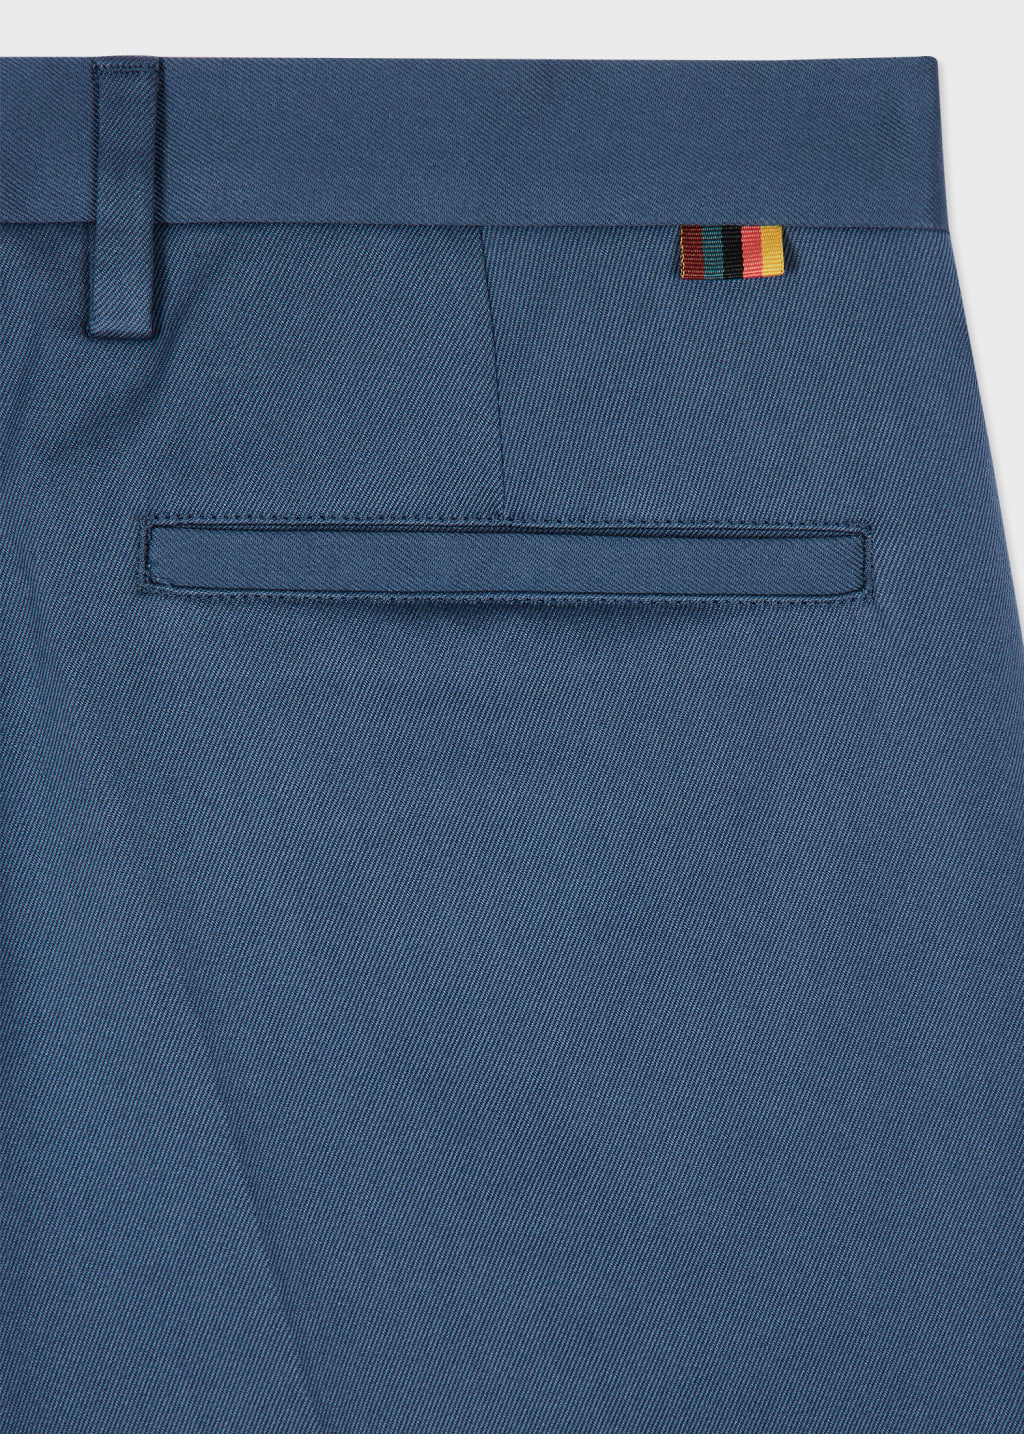 Detail View - Slim-Fit Petrol Blue Cotton-Stretch Chinos Paul Smith